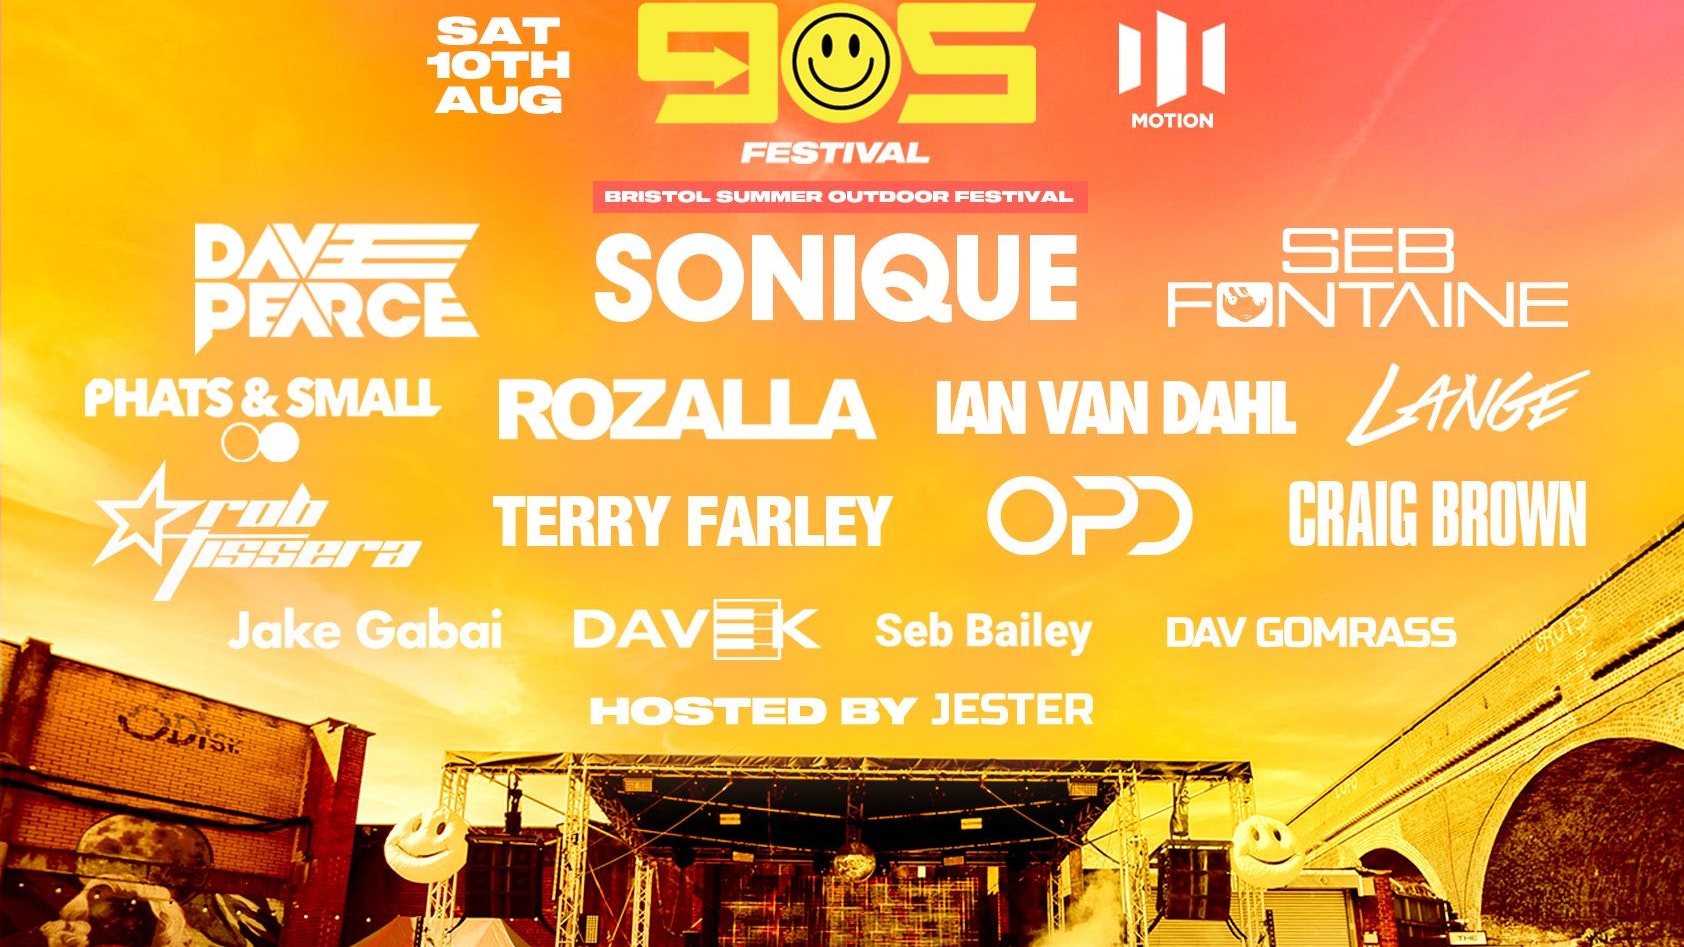 Back To The 90s – Summer Outdoor Festival – Motion [GENERAL ADMISSION TICKETS SELLING FAST!]